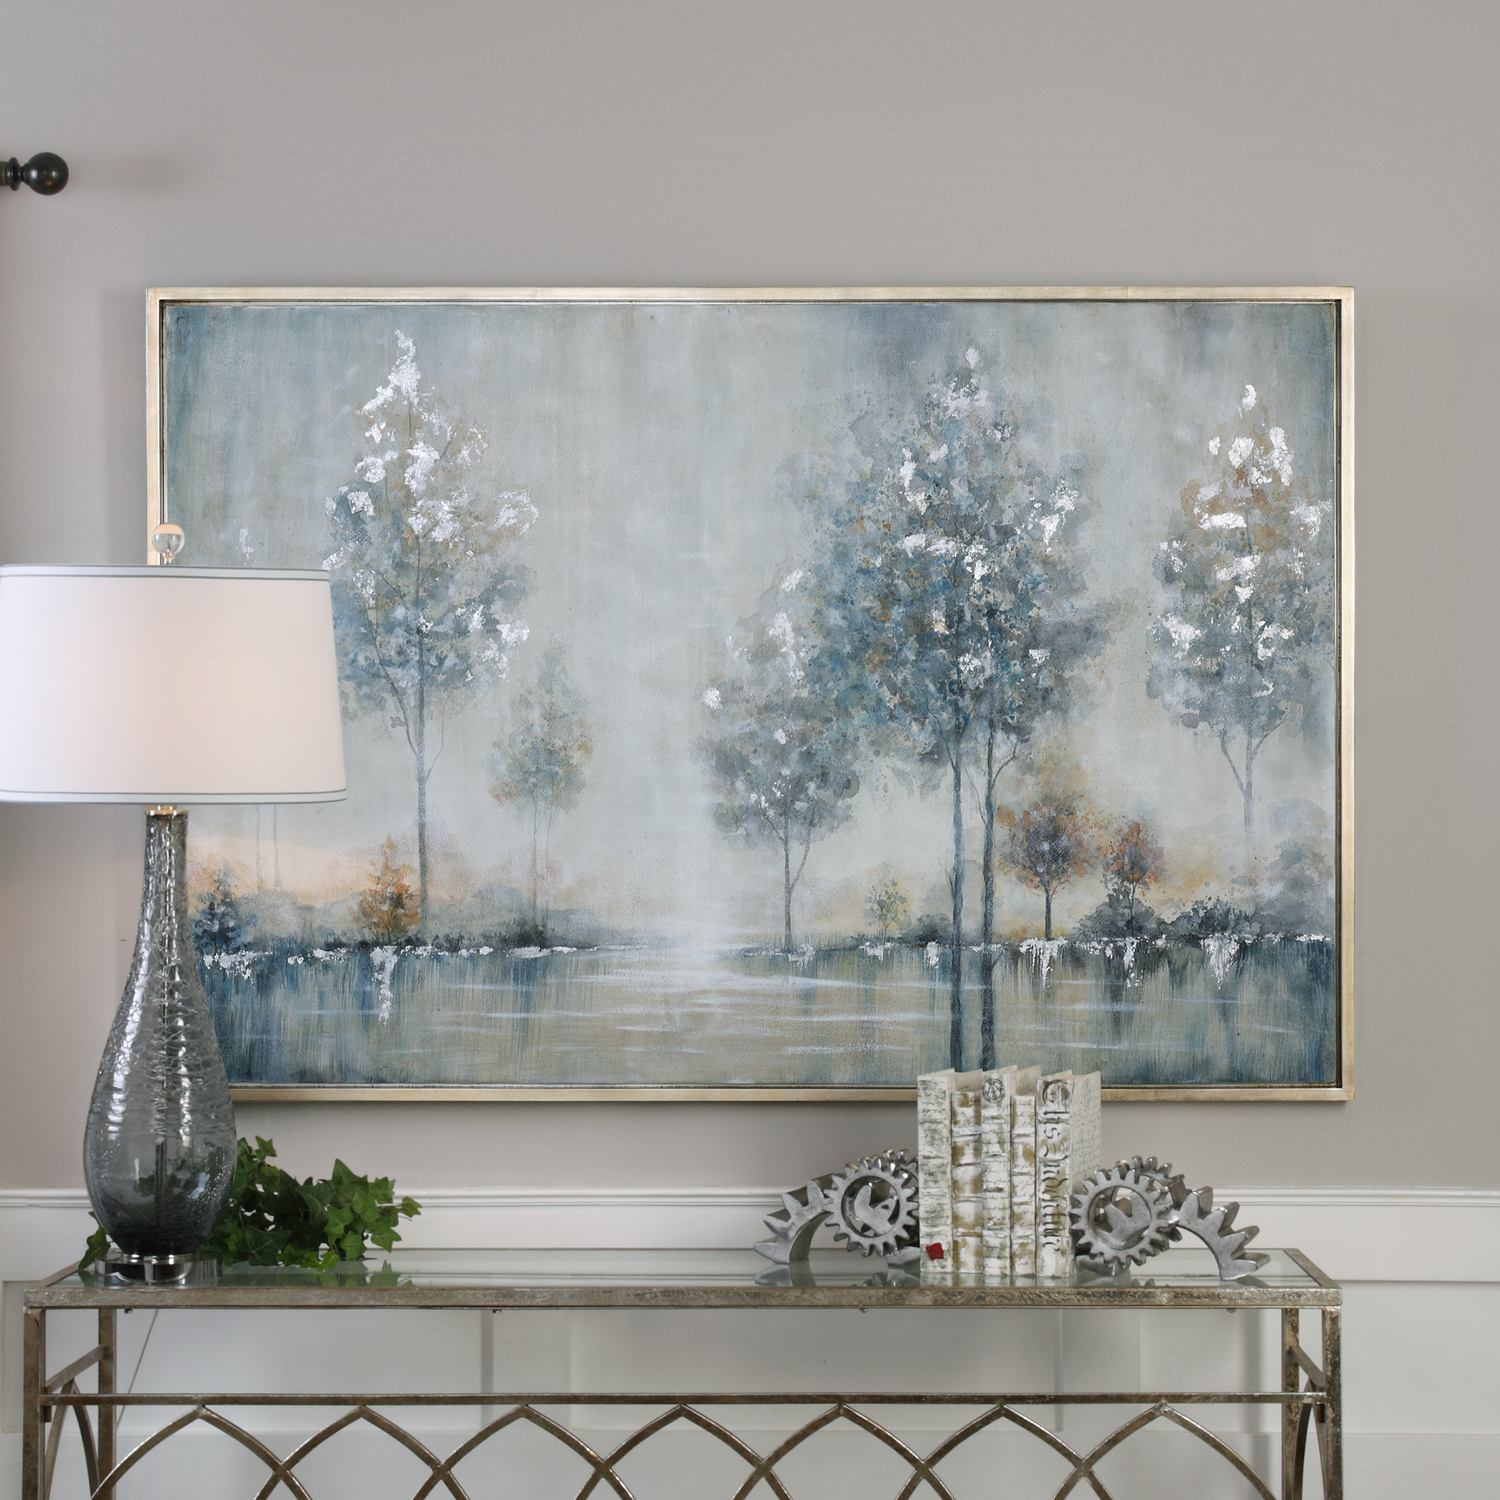 art for house walls Uttermost Landscape Art Hand Painted Canvas Stretched Over Wood Frame.  Surround Is A Silver Leaf Gallery Frame.